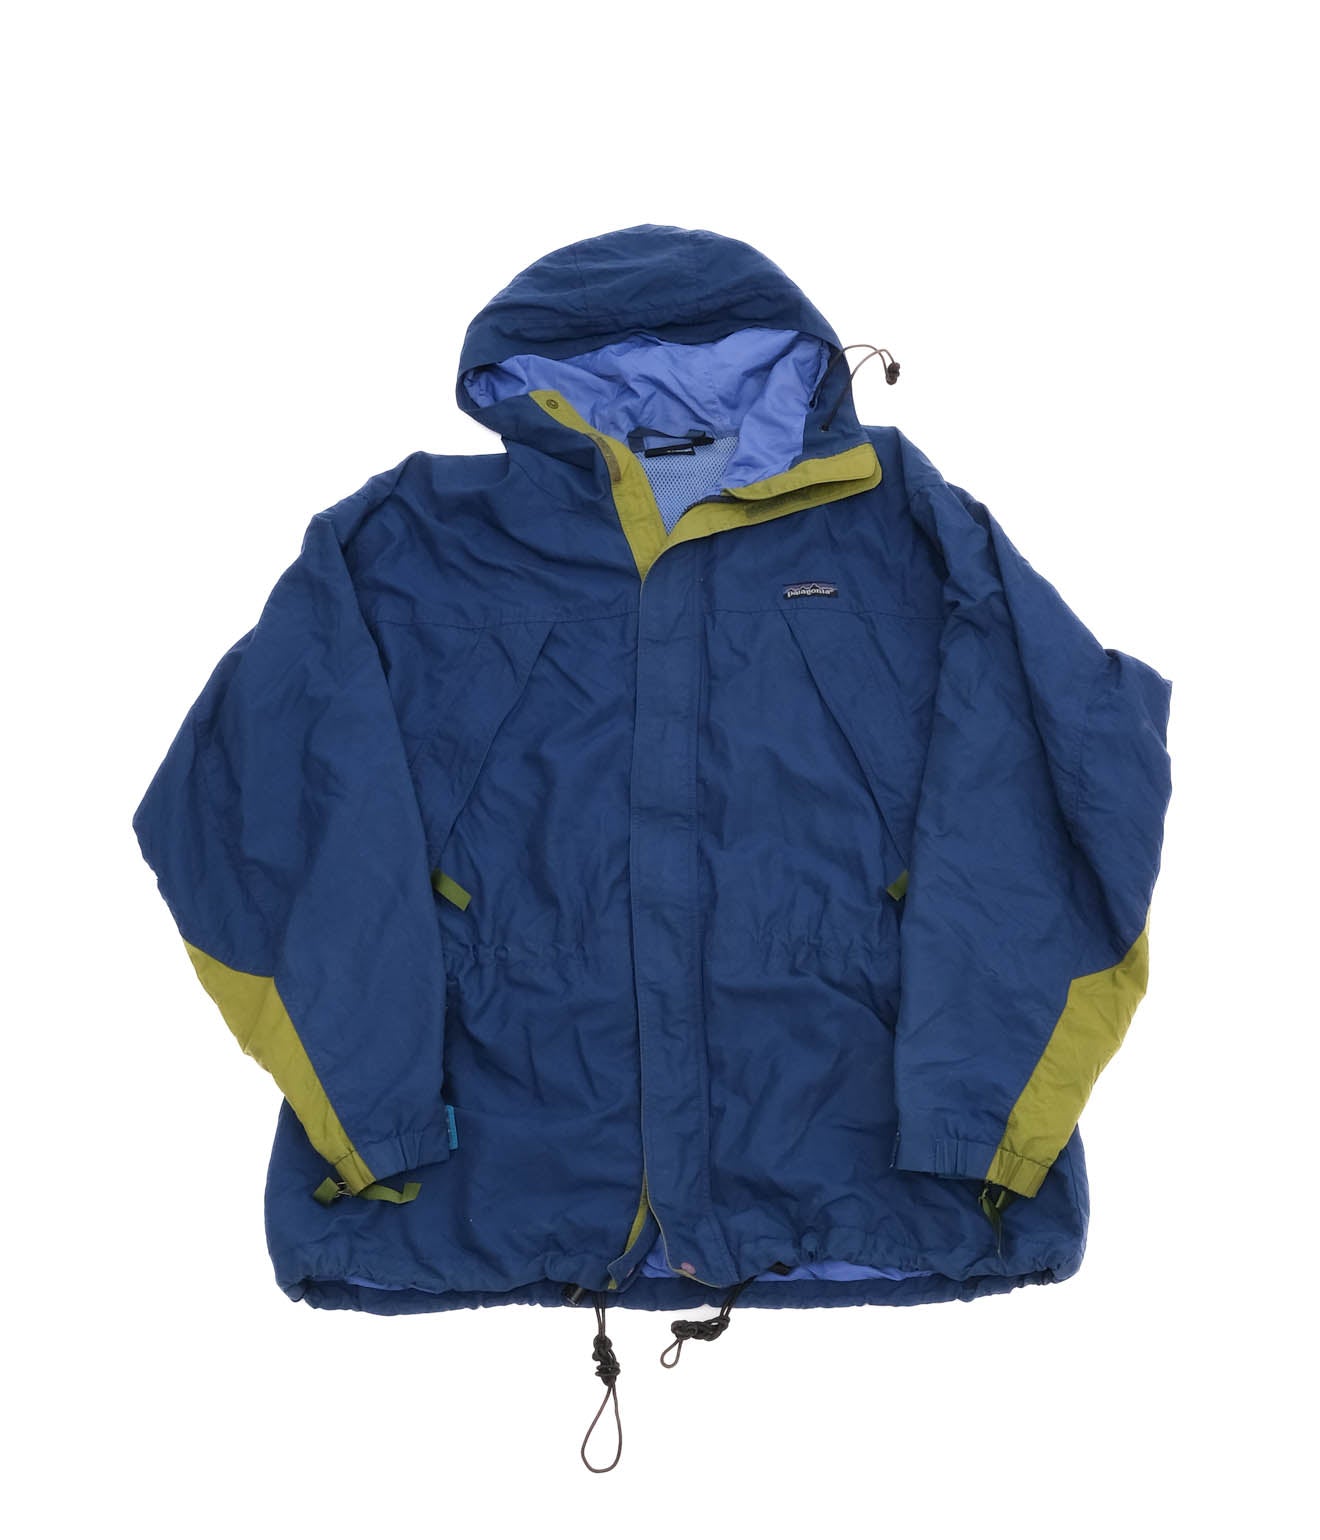 90's Patagonia Guide Shell Jacket (Blue)